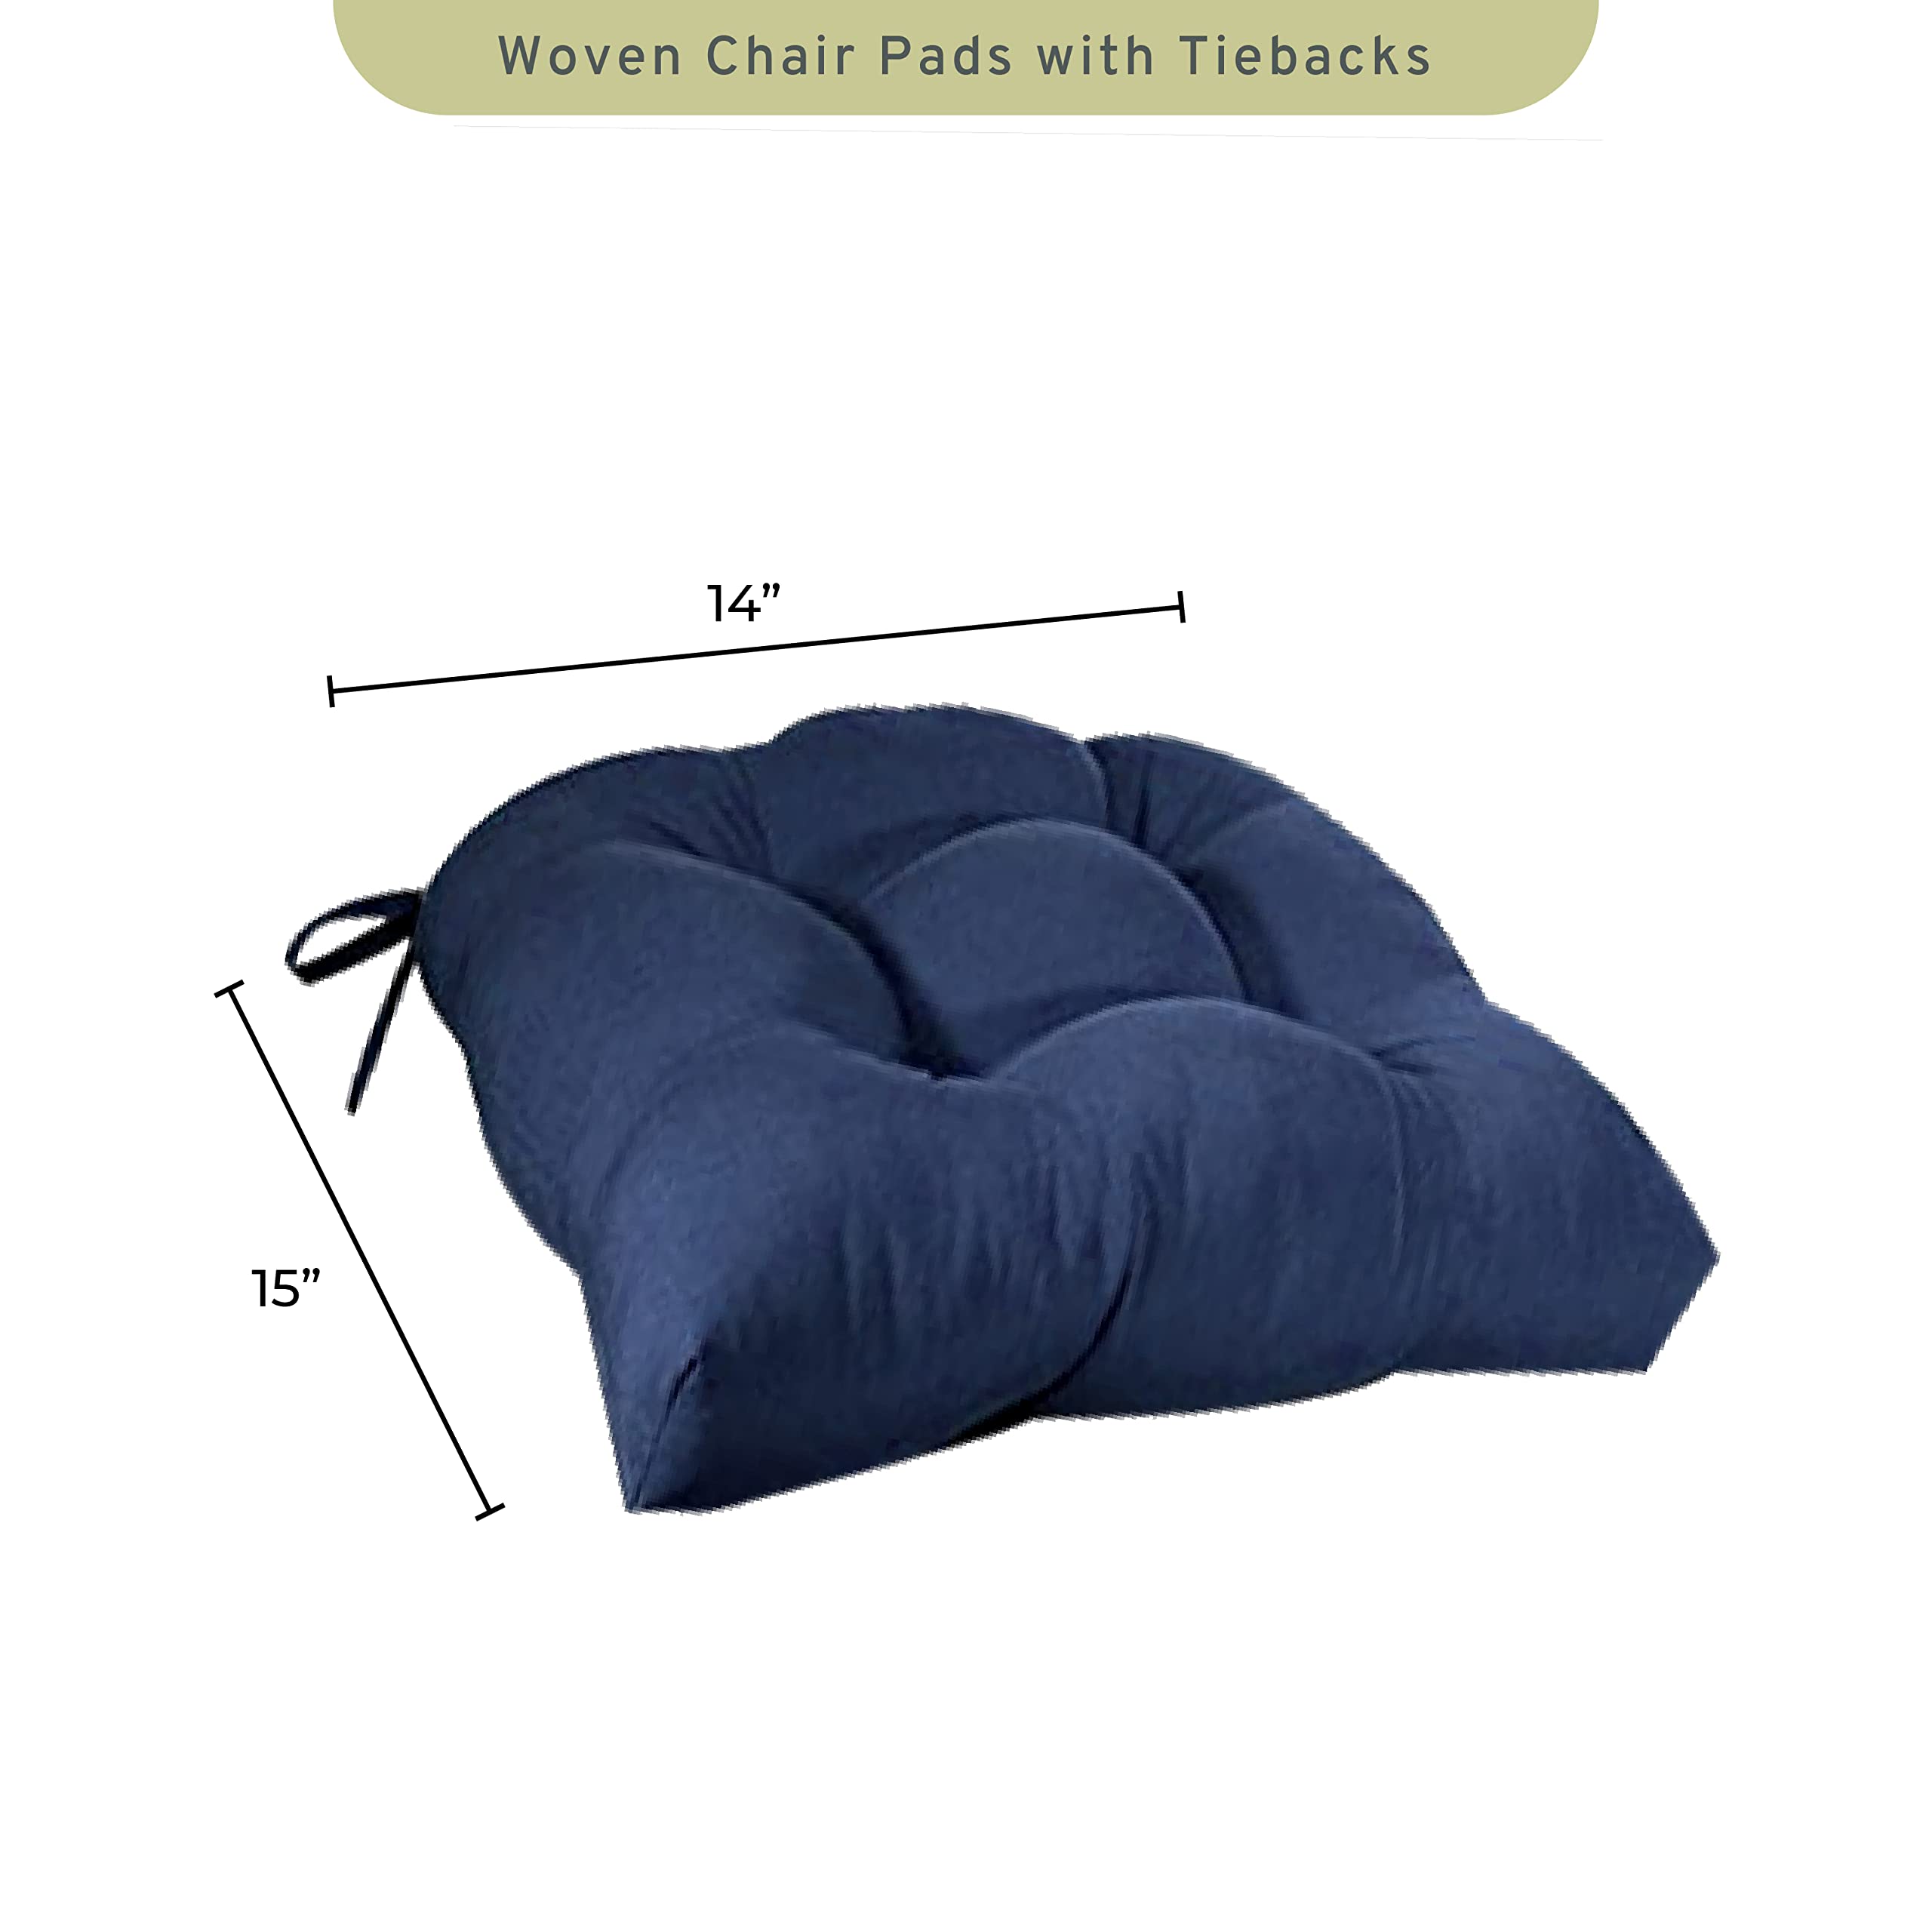 Arlee Home Fashions – Fiber Filled Premium Chair Pads - Chair Pads with Tiebacks –14” L X 15” W – Navy - Set of 2